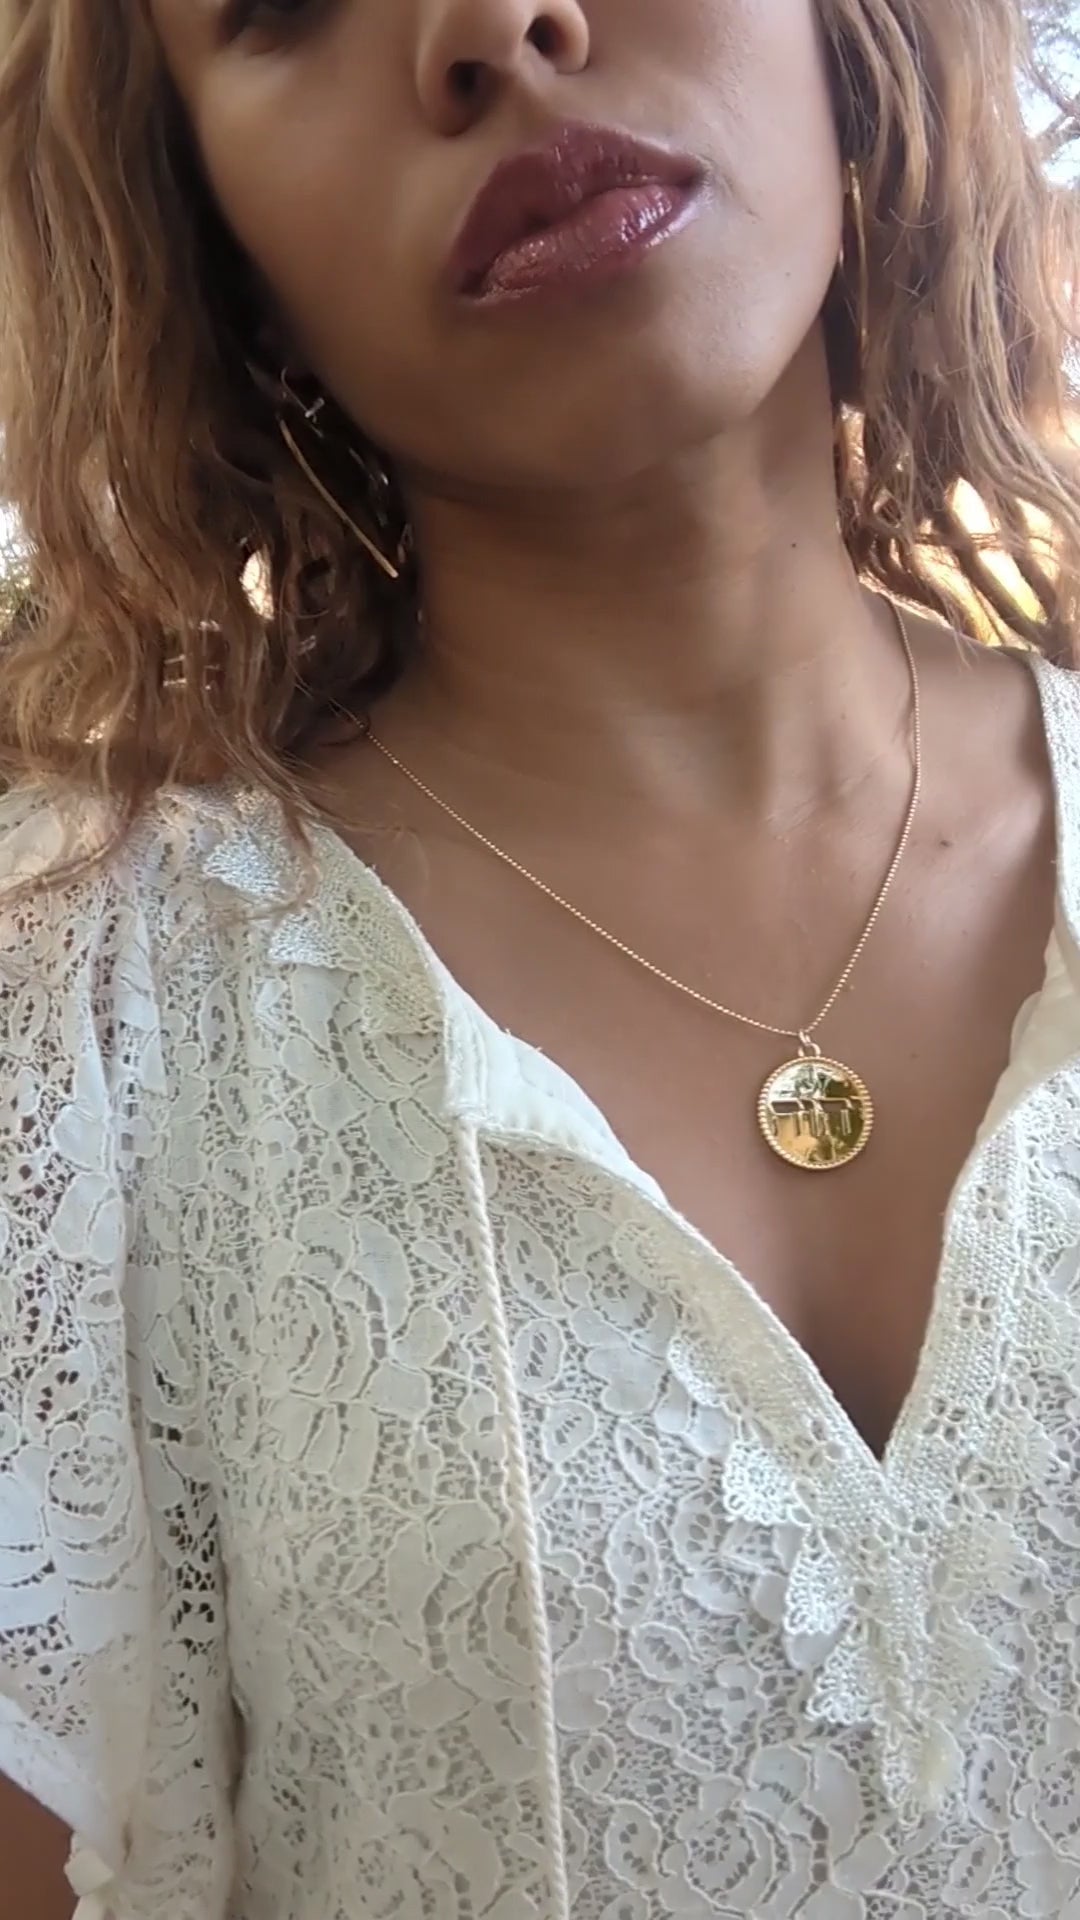 video of black woman in white dress in garden desert wearing the Jehovah cutout coin from the wandering jewel